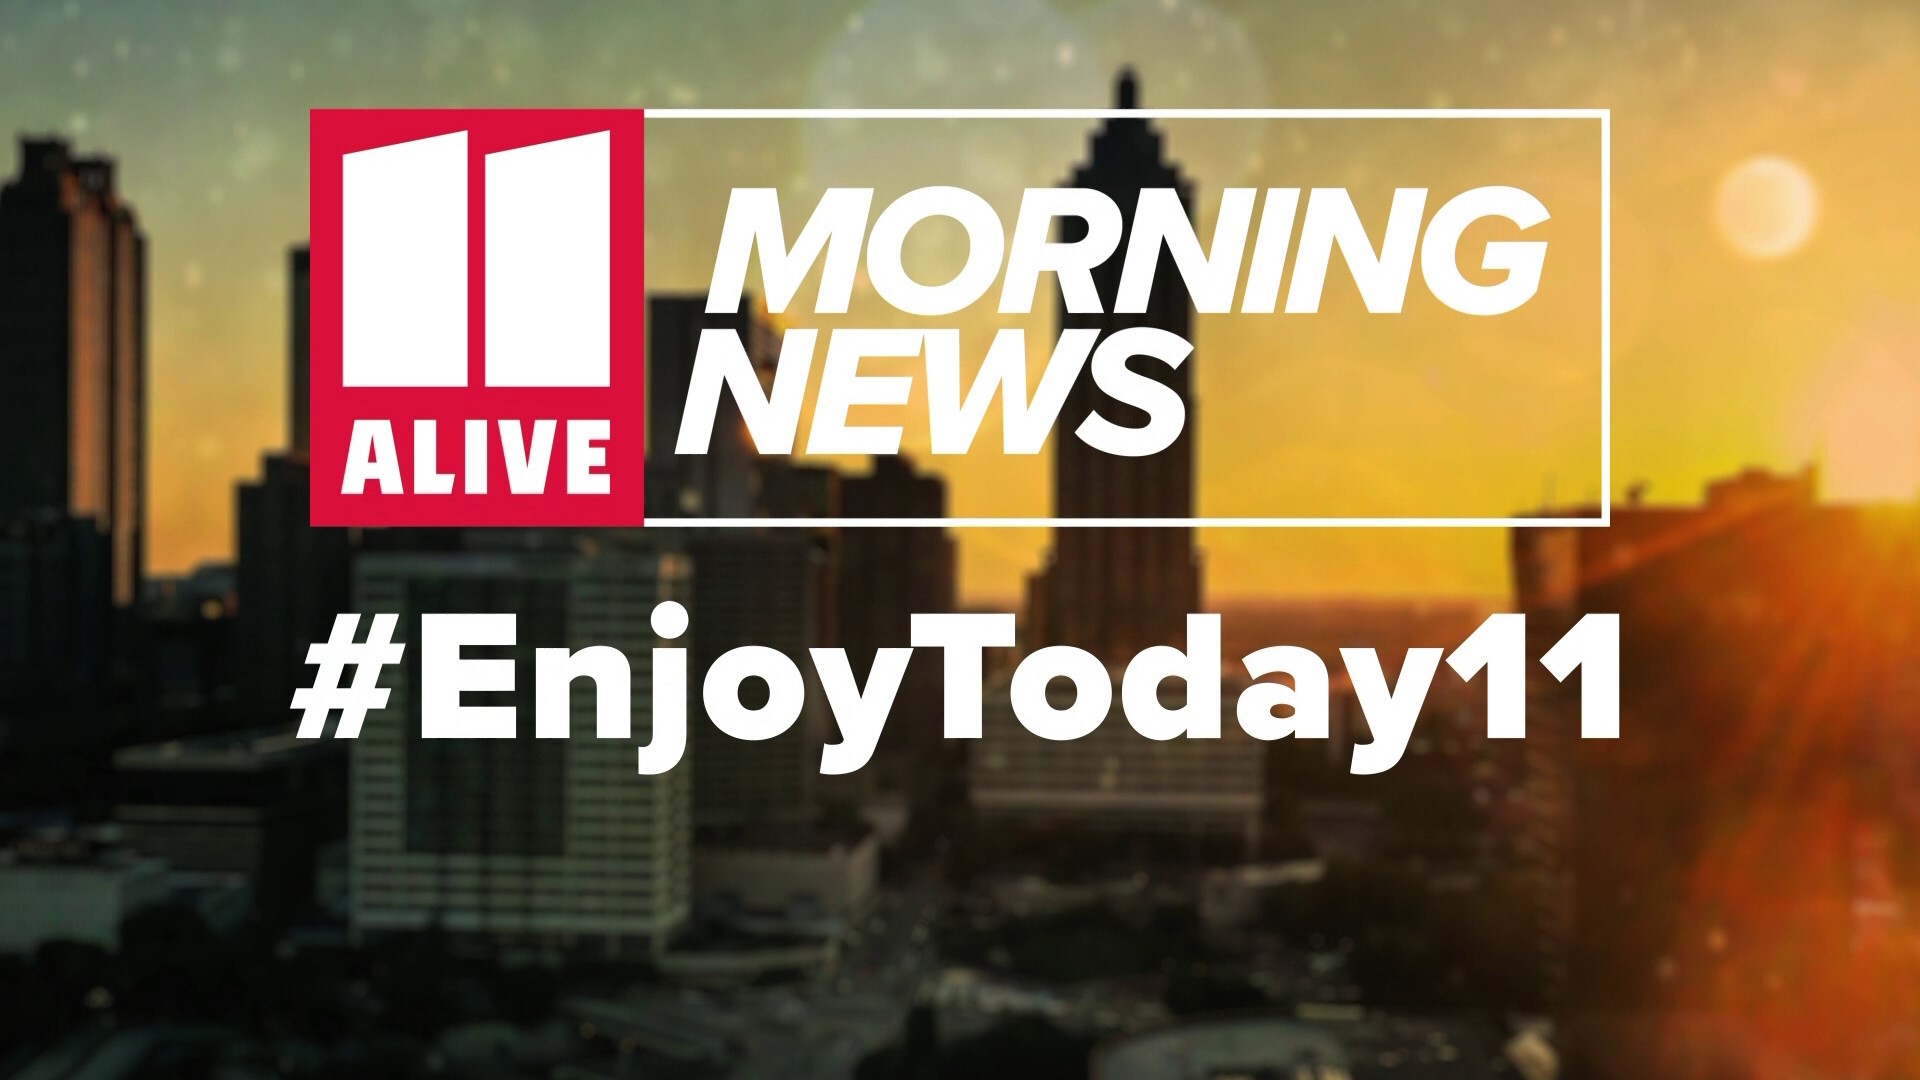 11Alive Morning News launched a new series featuring local organizations, schools and more across metro Atlanta!